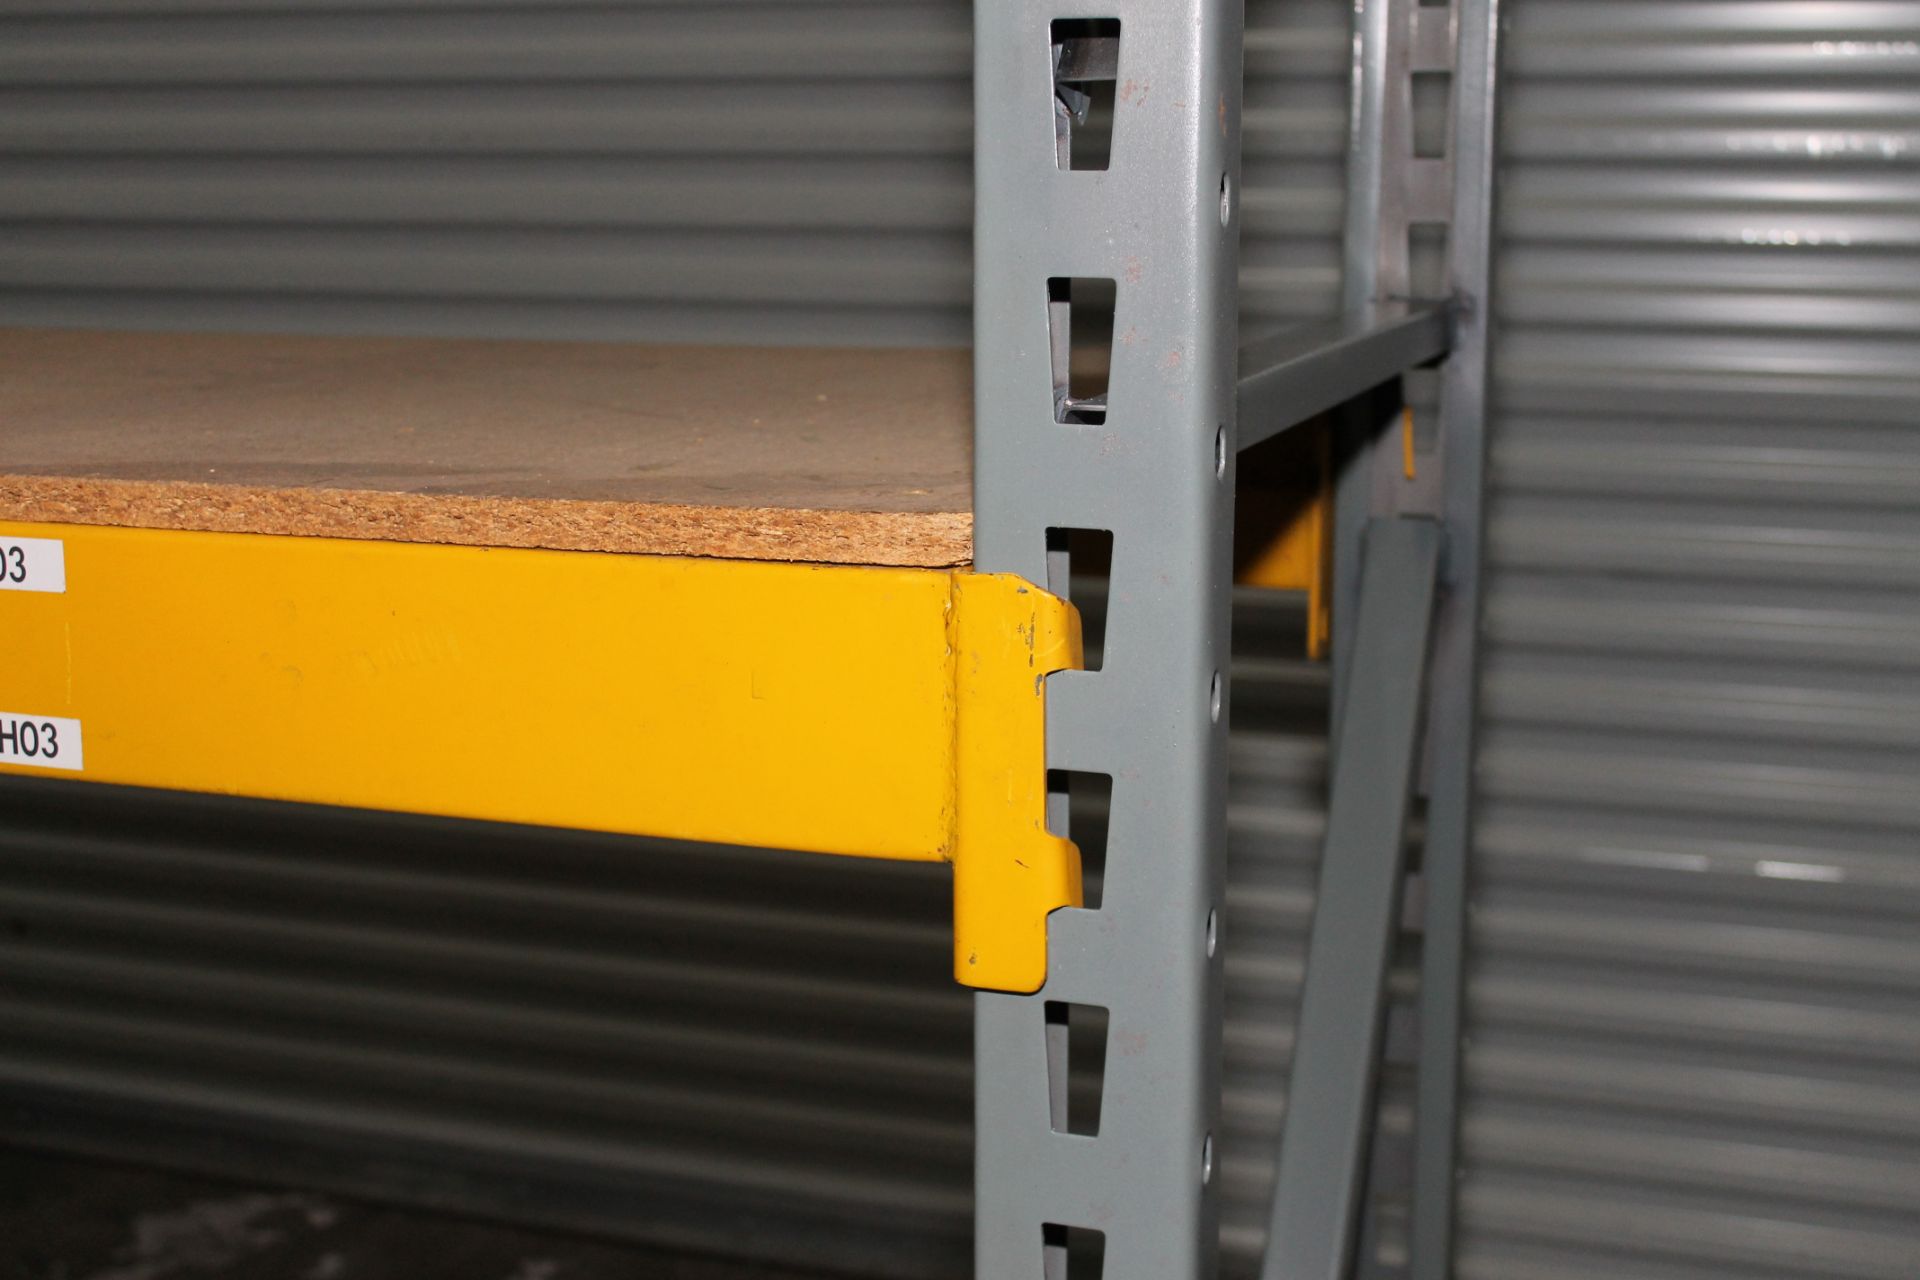 30 SECTIONS OF 96"H X 24"D X 96"L STOCK ROOM PALLET RACK SHELVING,  TOTAL 30 SECTIONS, 3 ROWS - Image 2 of 5